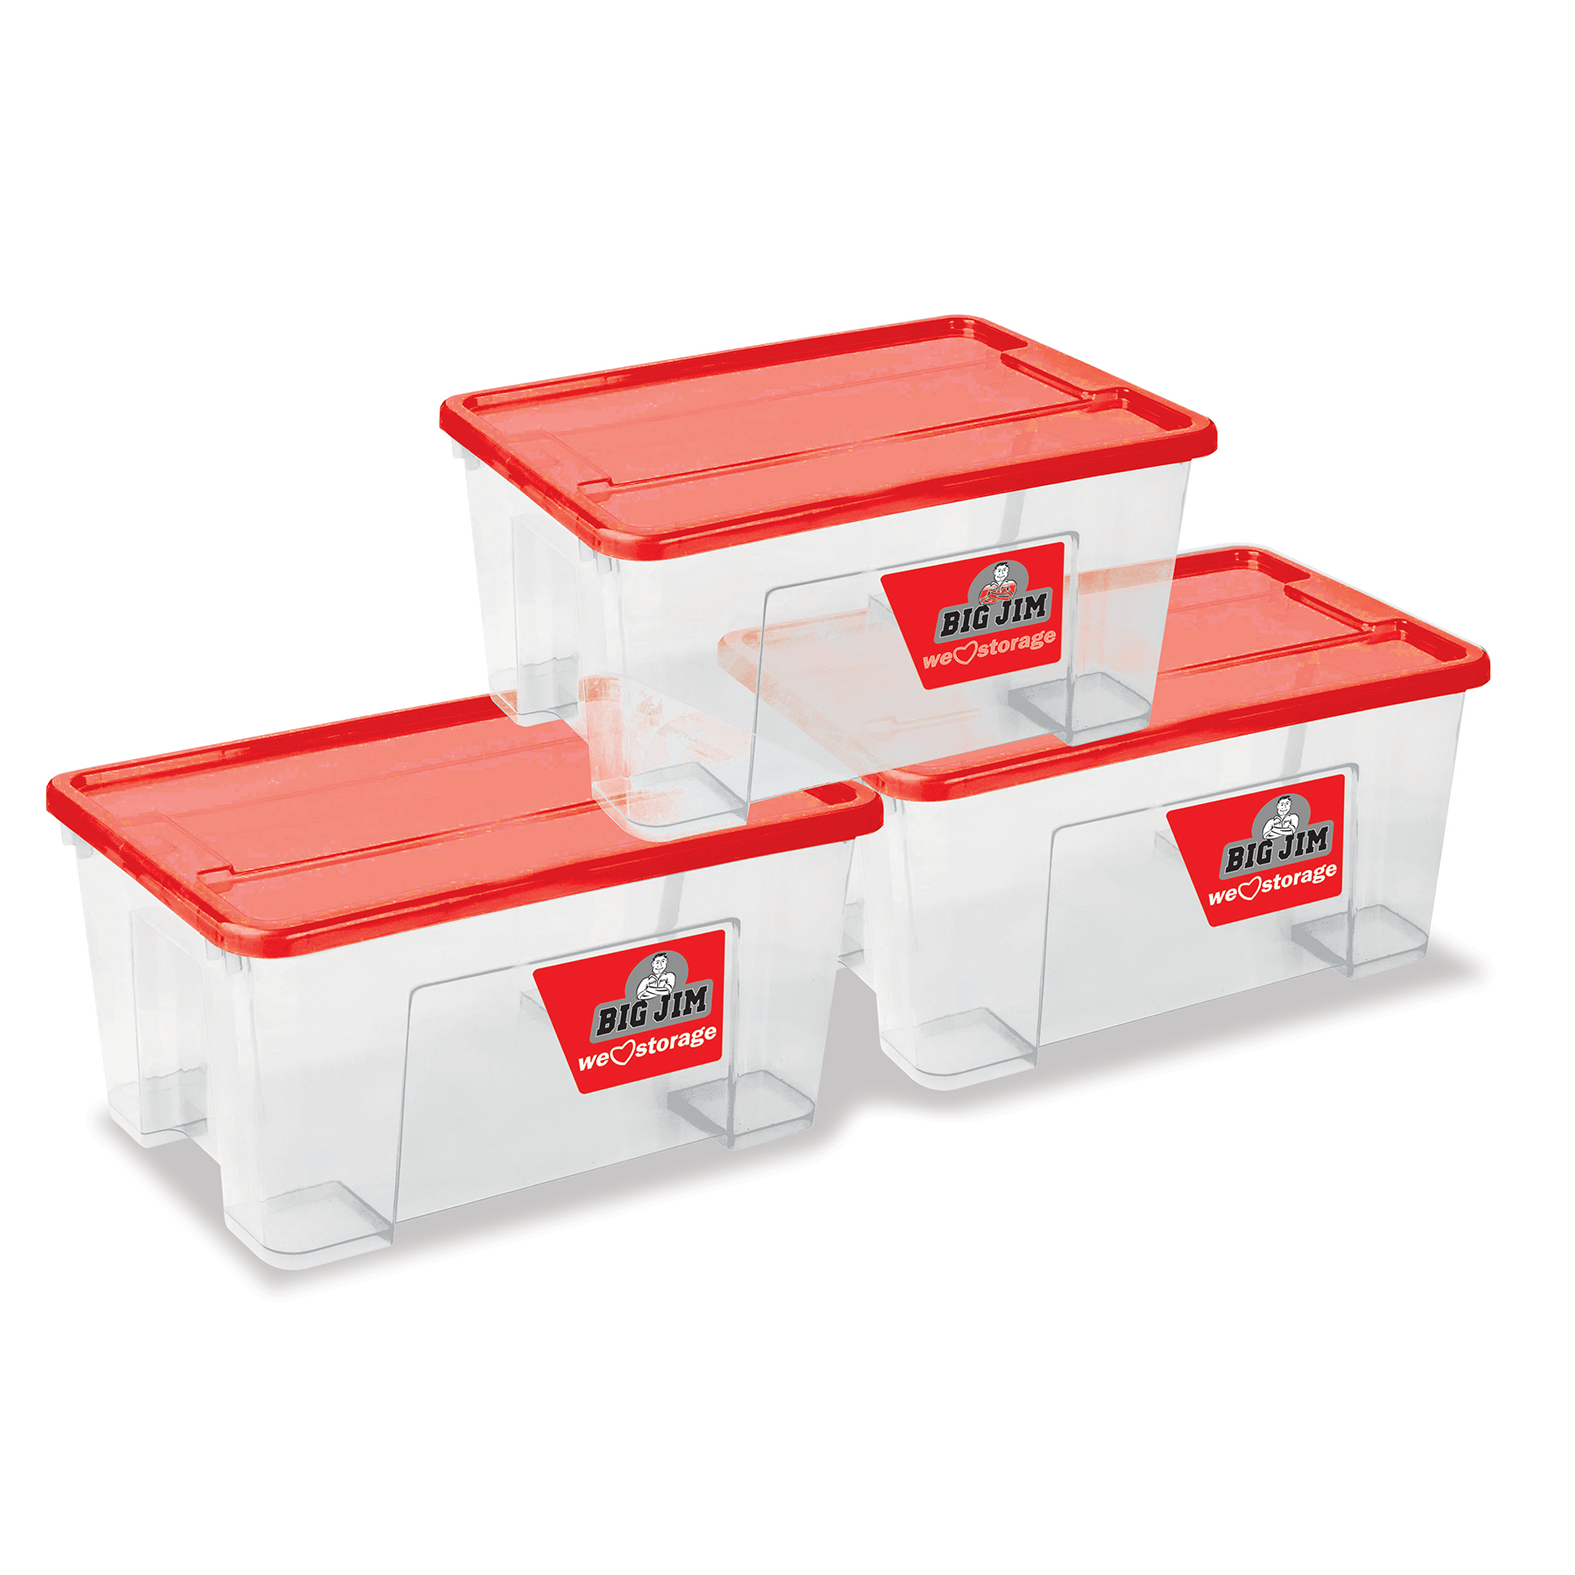 Capacity - 13 Litres. Made From Bpa Free Virgin Polypropylene Material. Designed To Fit Together In An Efficient Way. Easily Stacked For Storage. Light weight Making It Easy To Handle.